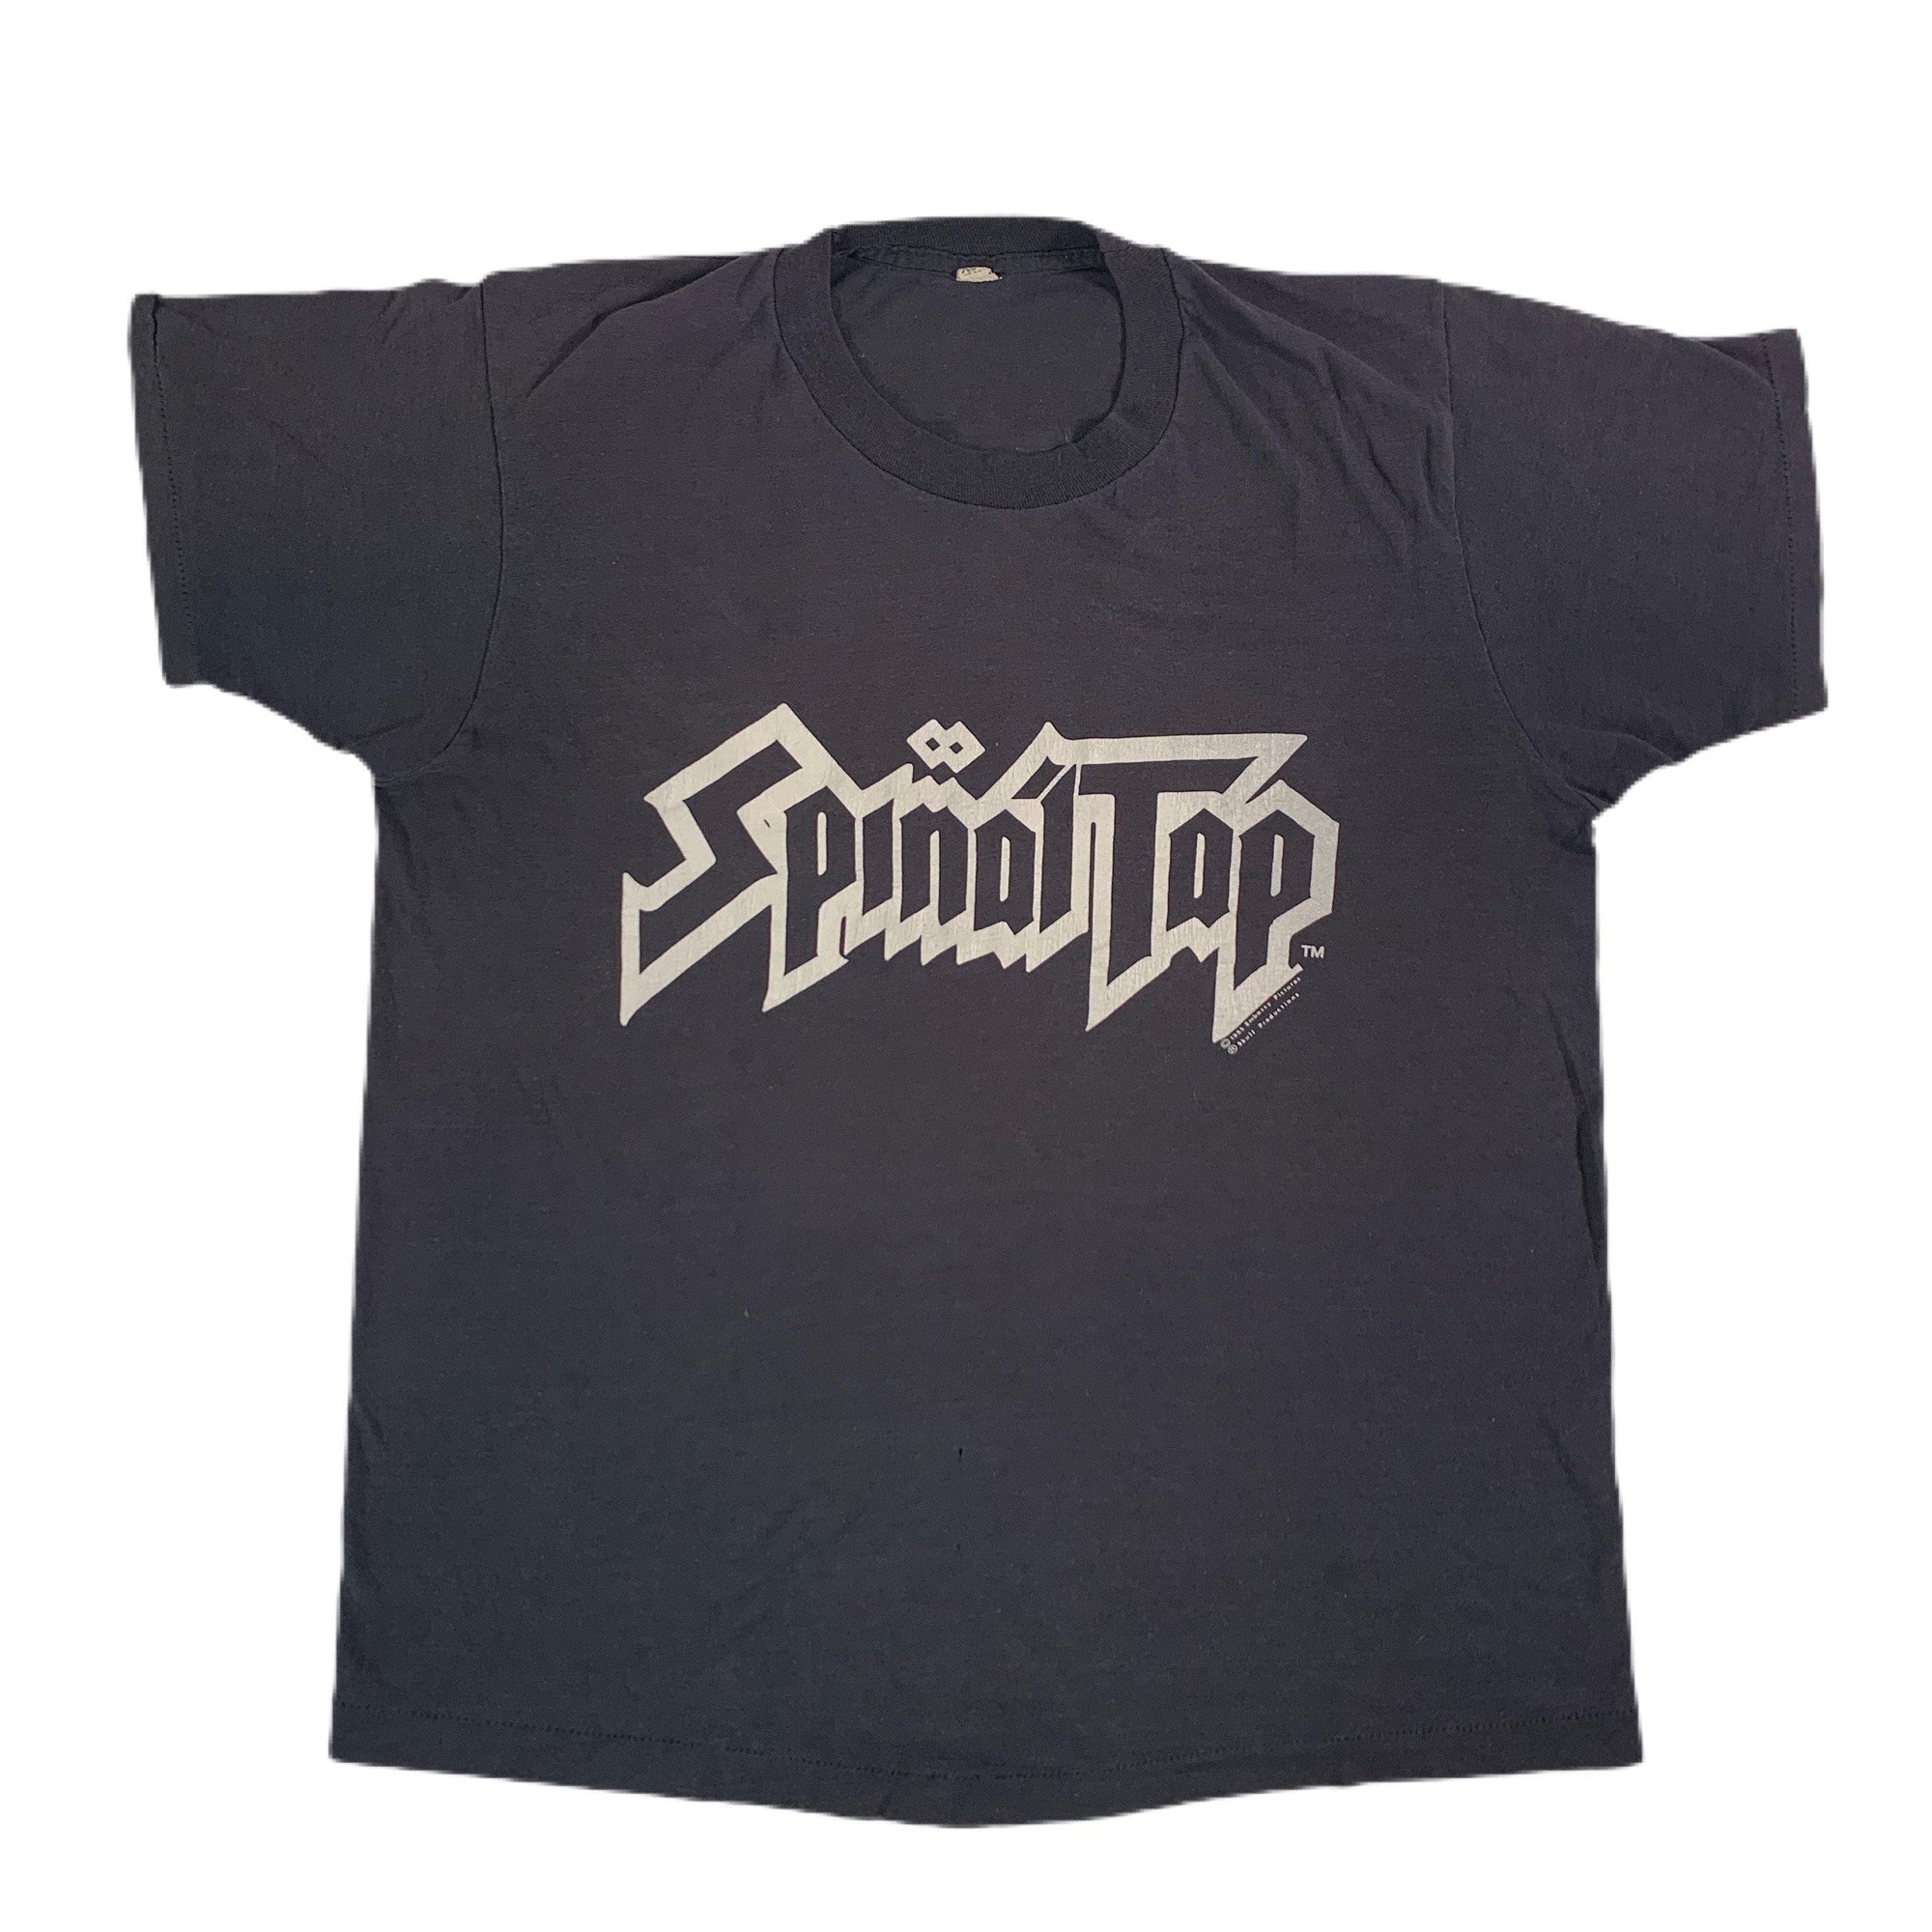 Vintage Spinal Tap "Tap Into America" T-Shirt - jointcustodydc